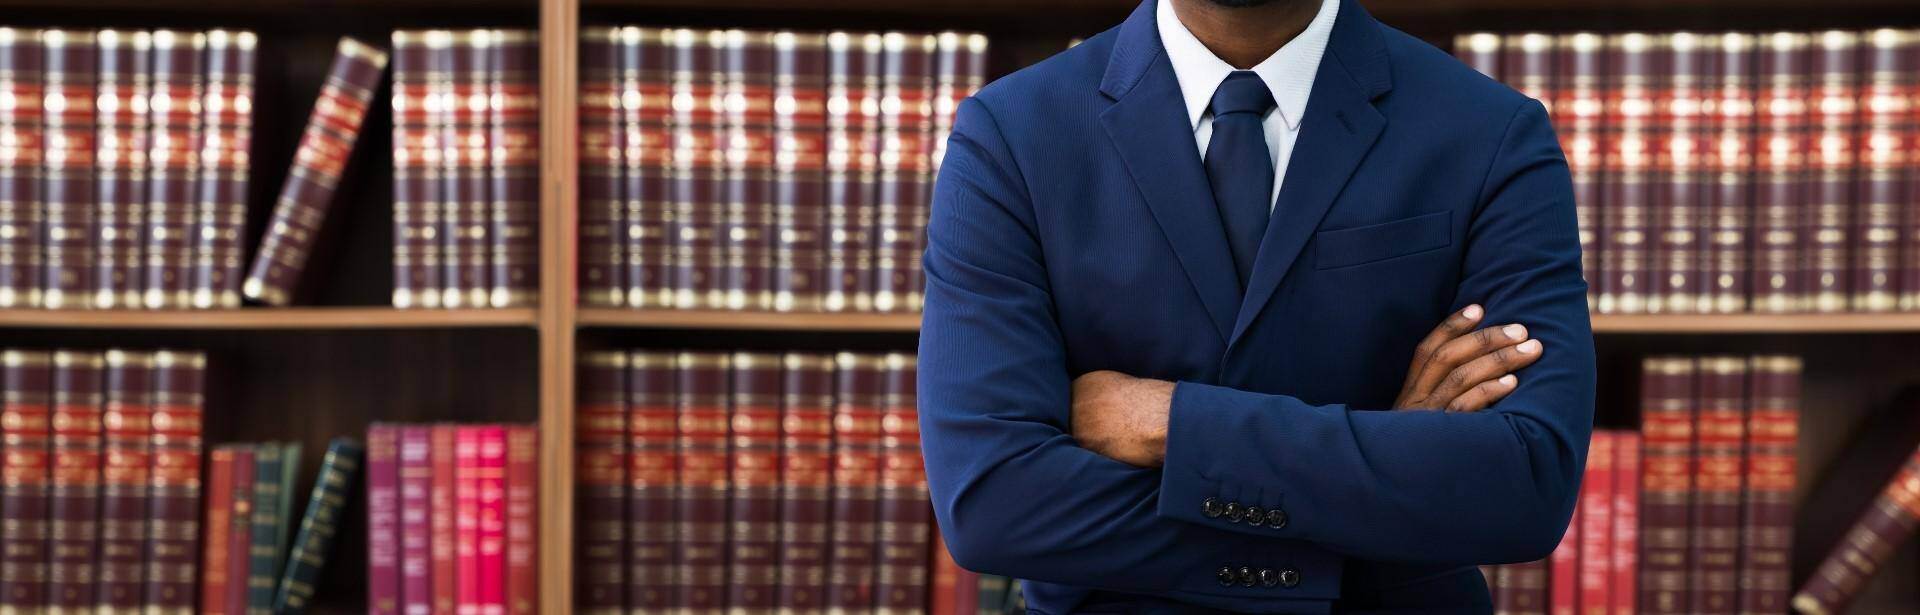 A black lawyer standing in front of a bookshelf of law book in Pooler, Georgia